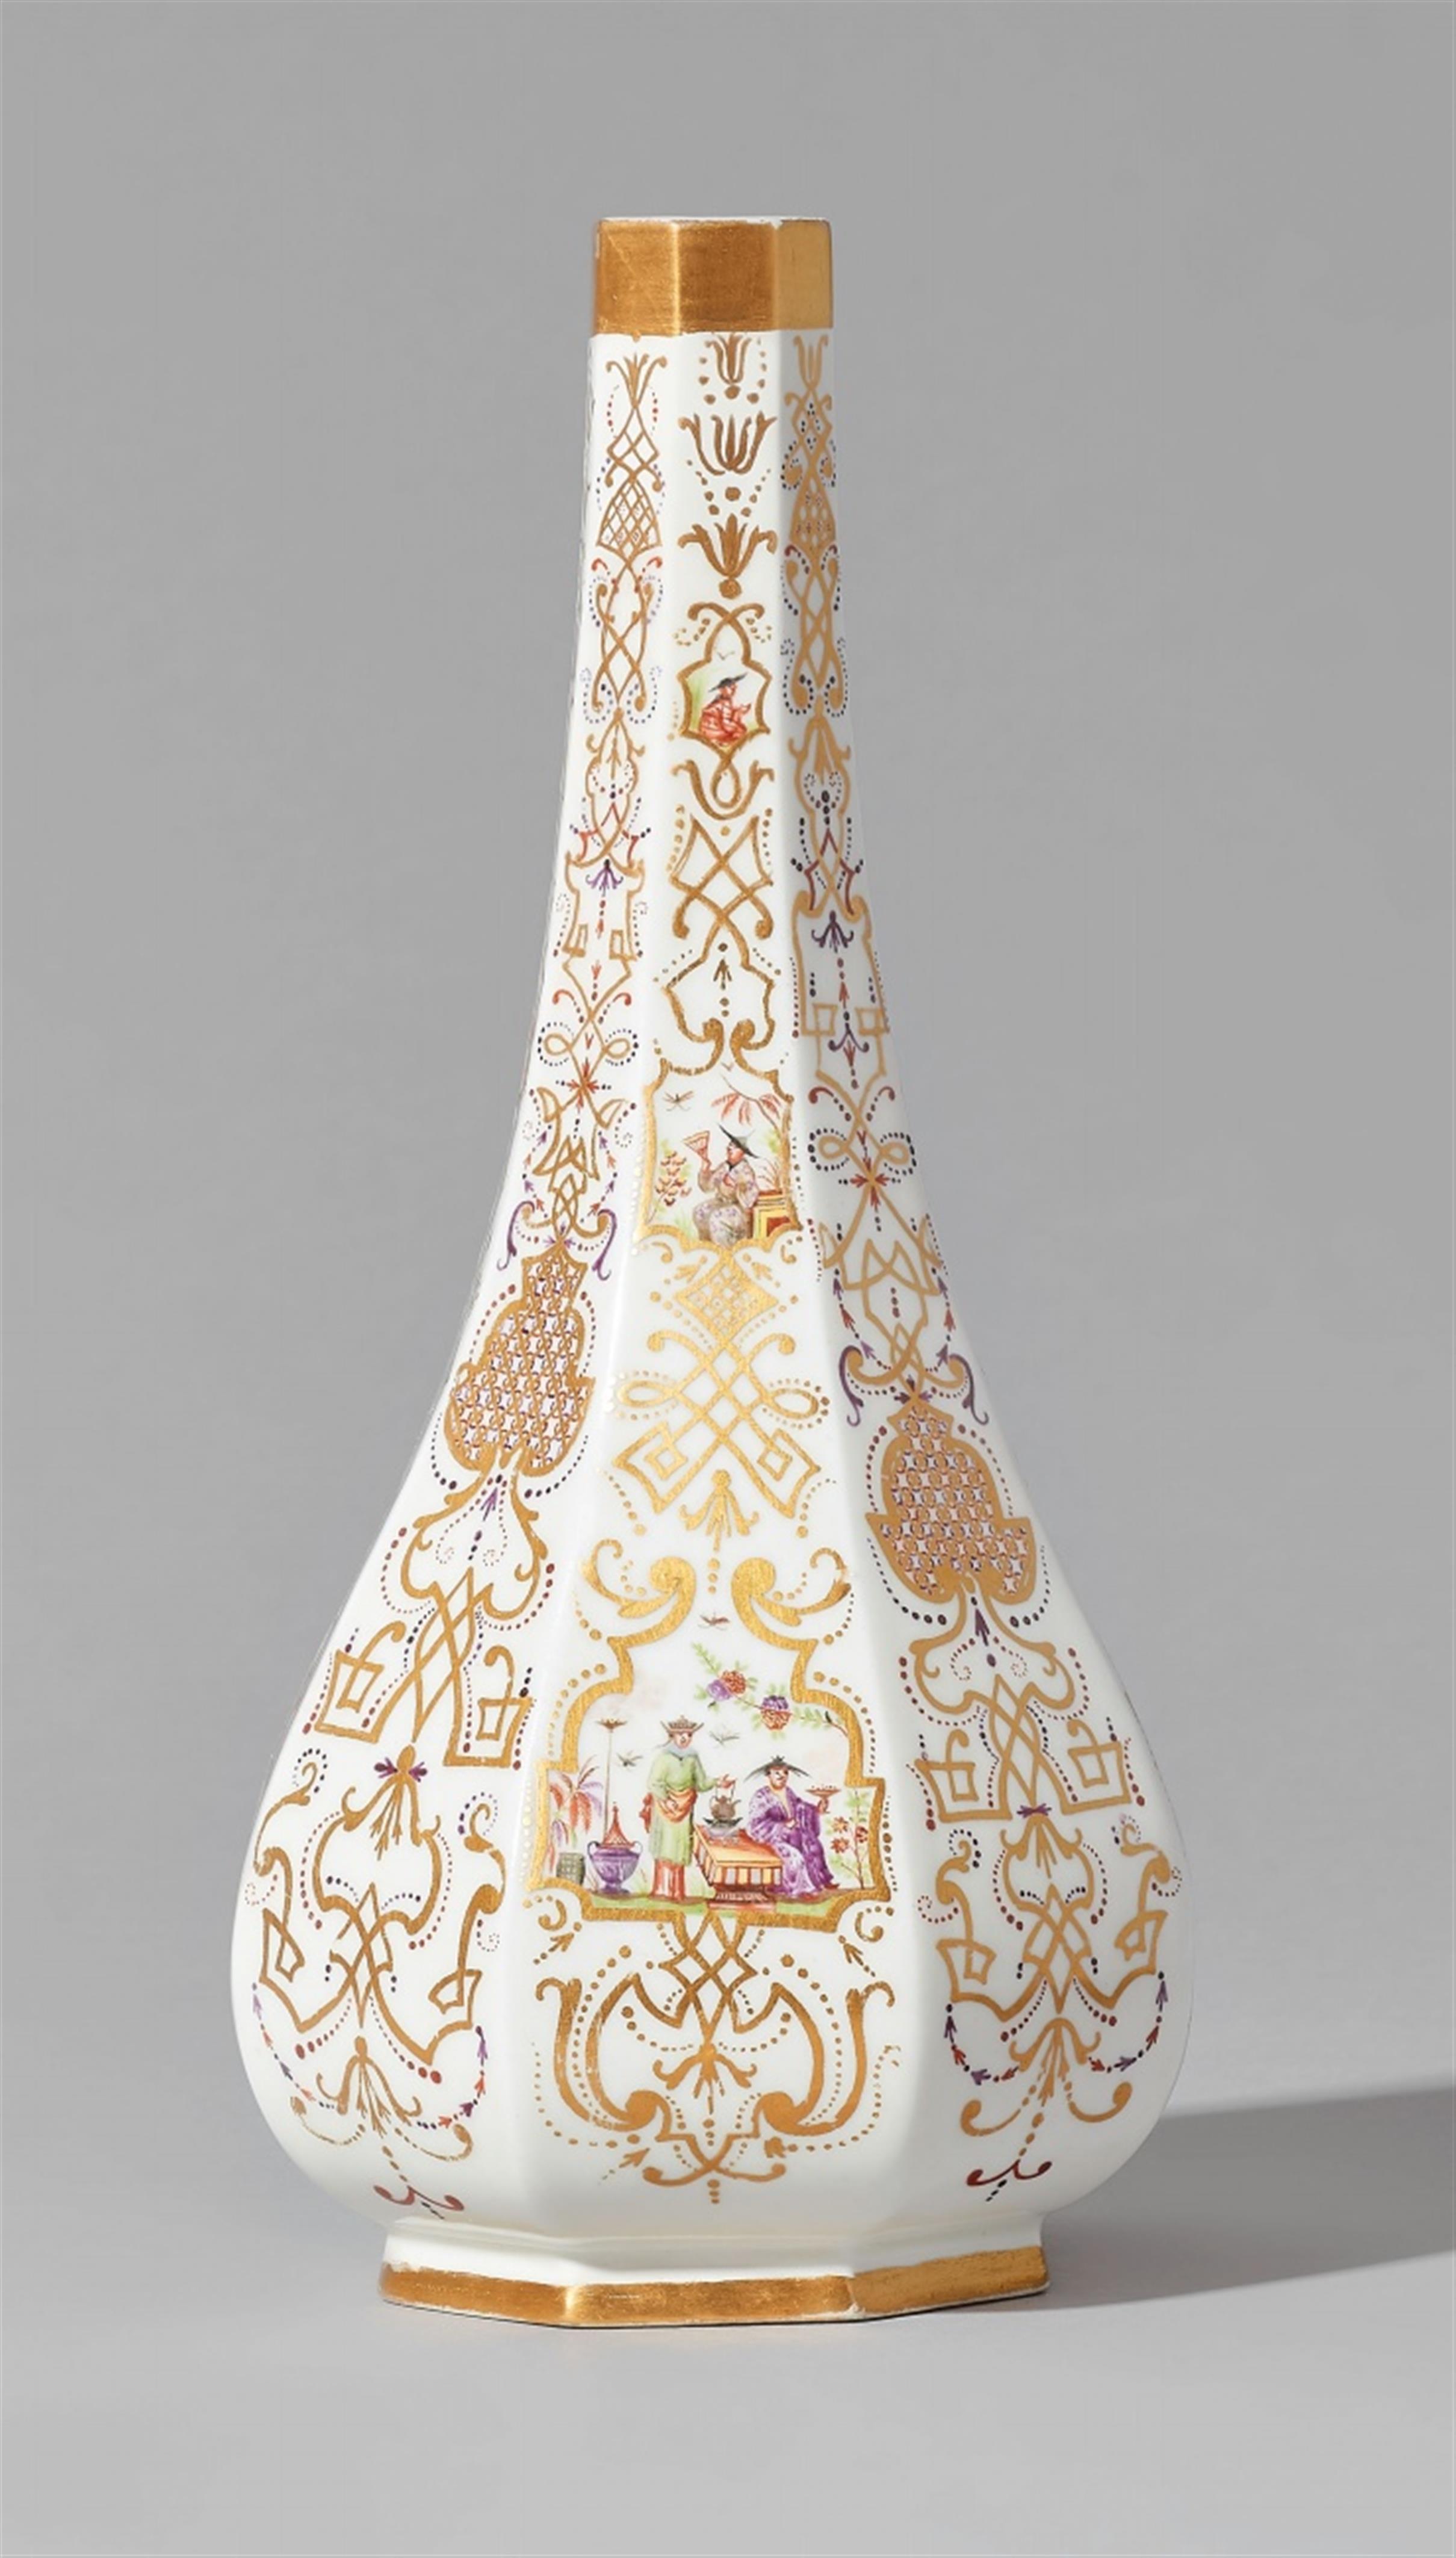 A rare and finely decorated Meissen porcelain sake bottle - image-2